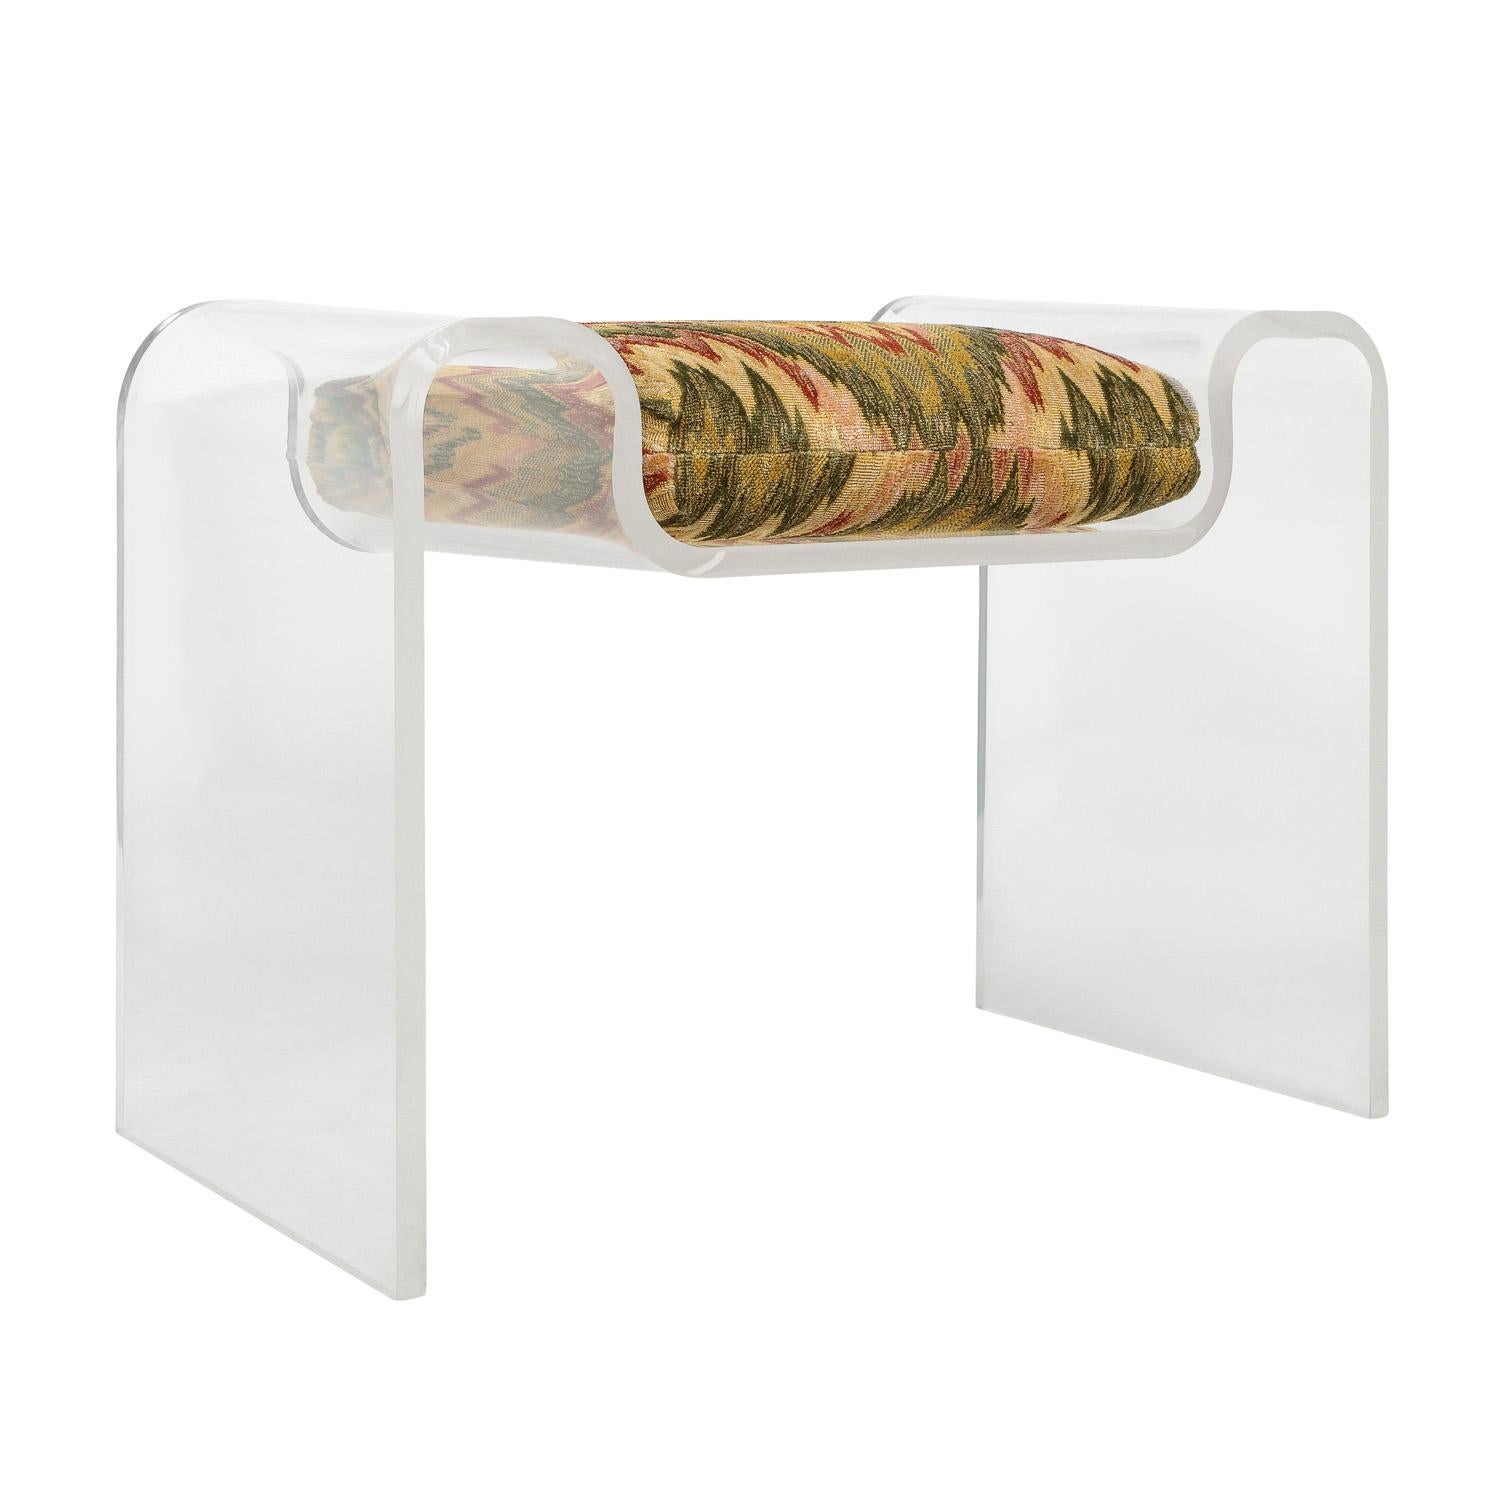 Sculptural molded lucite bench with seat cushion by Karl Springer, American 1970's. This bench is ideal for a vanity.

Reference:
Karl Springer LTD brown paper catalog published in the 1970’s, on page 54 is a photo of this model bench without the